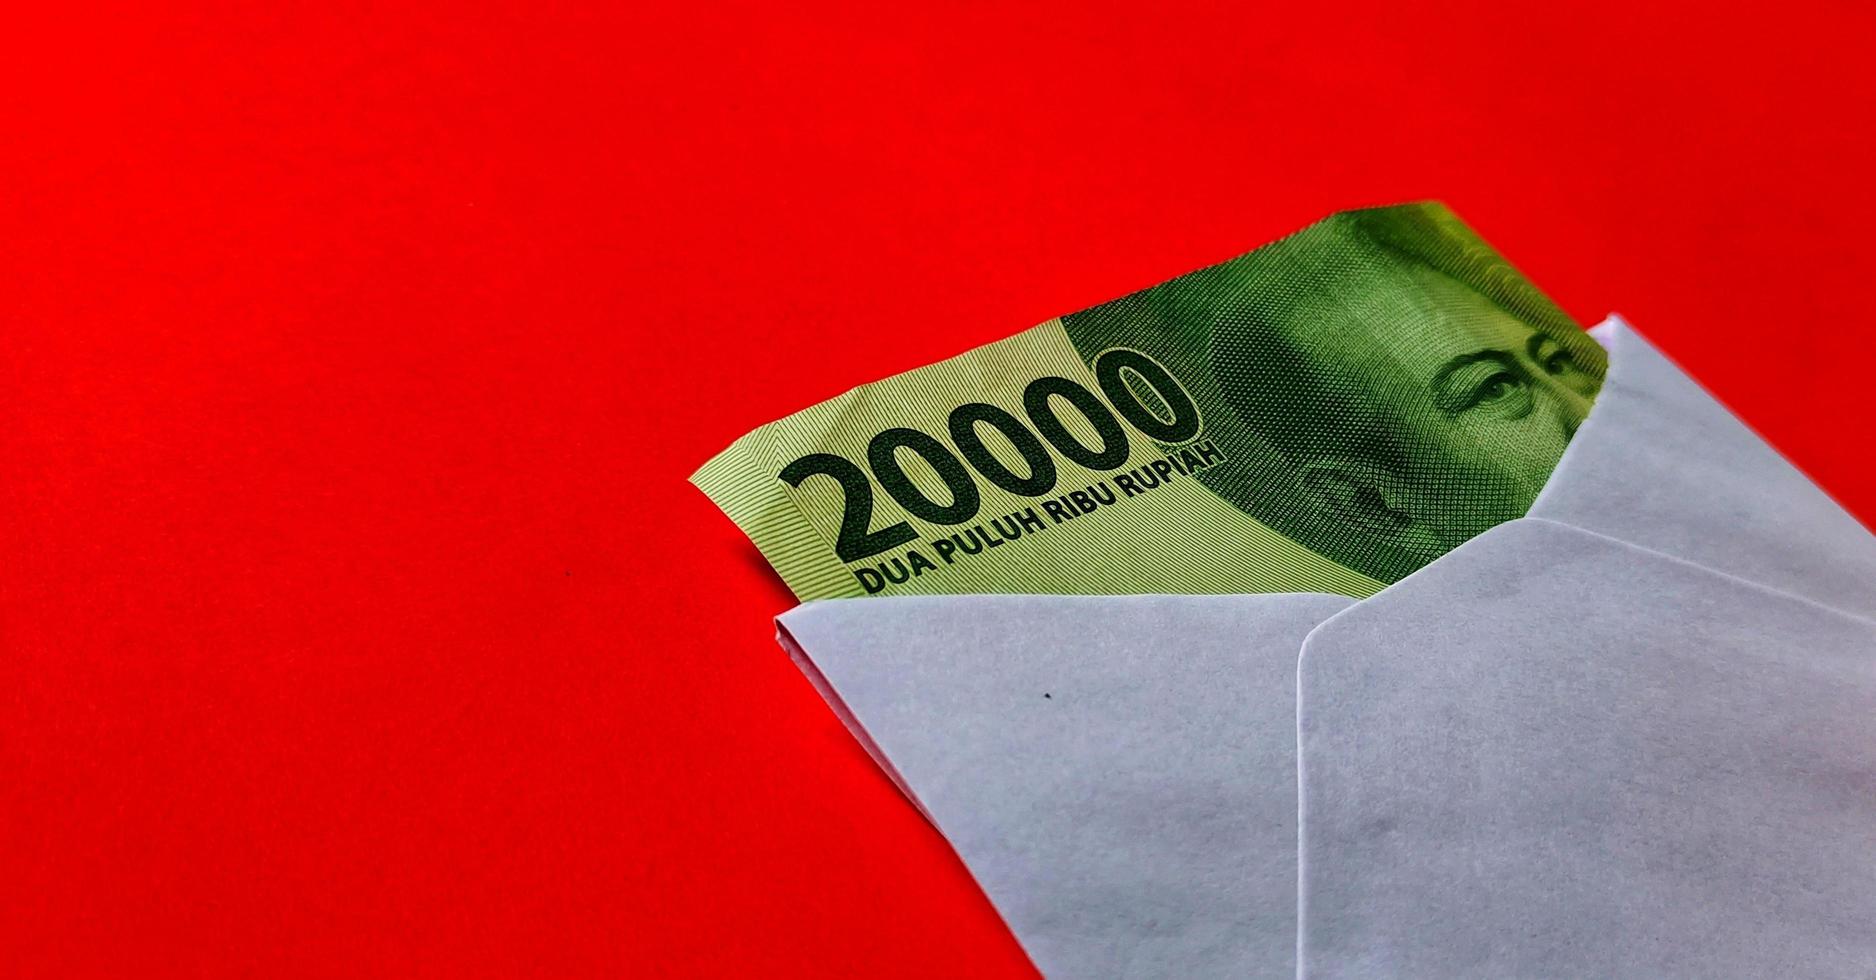 Indonesian rupiah banknotes worth IDR 20,000 in a white envelope isolated on red background photo